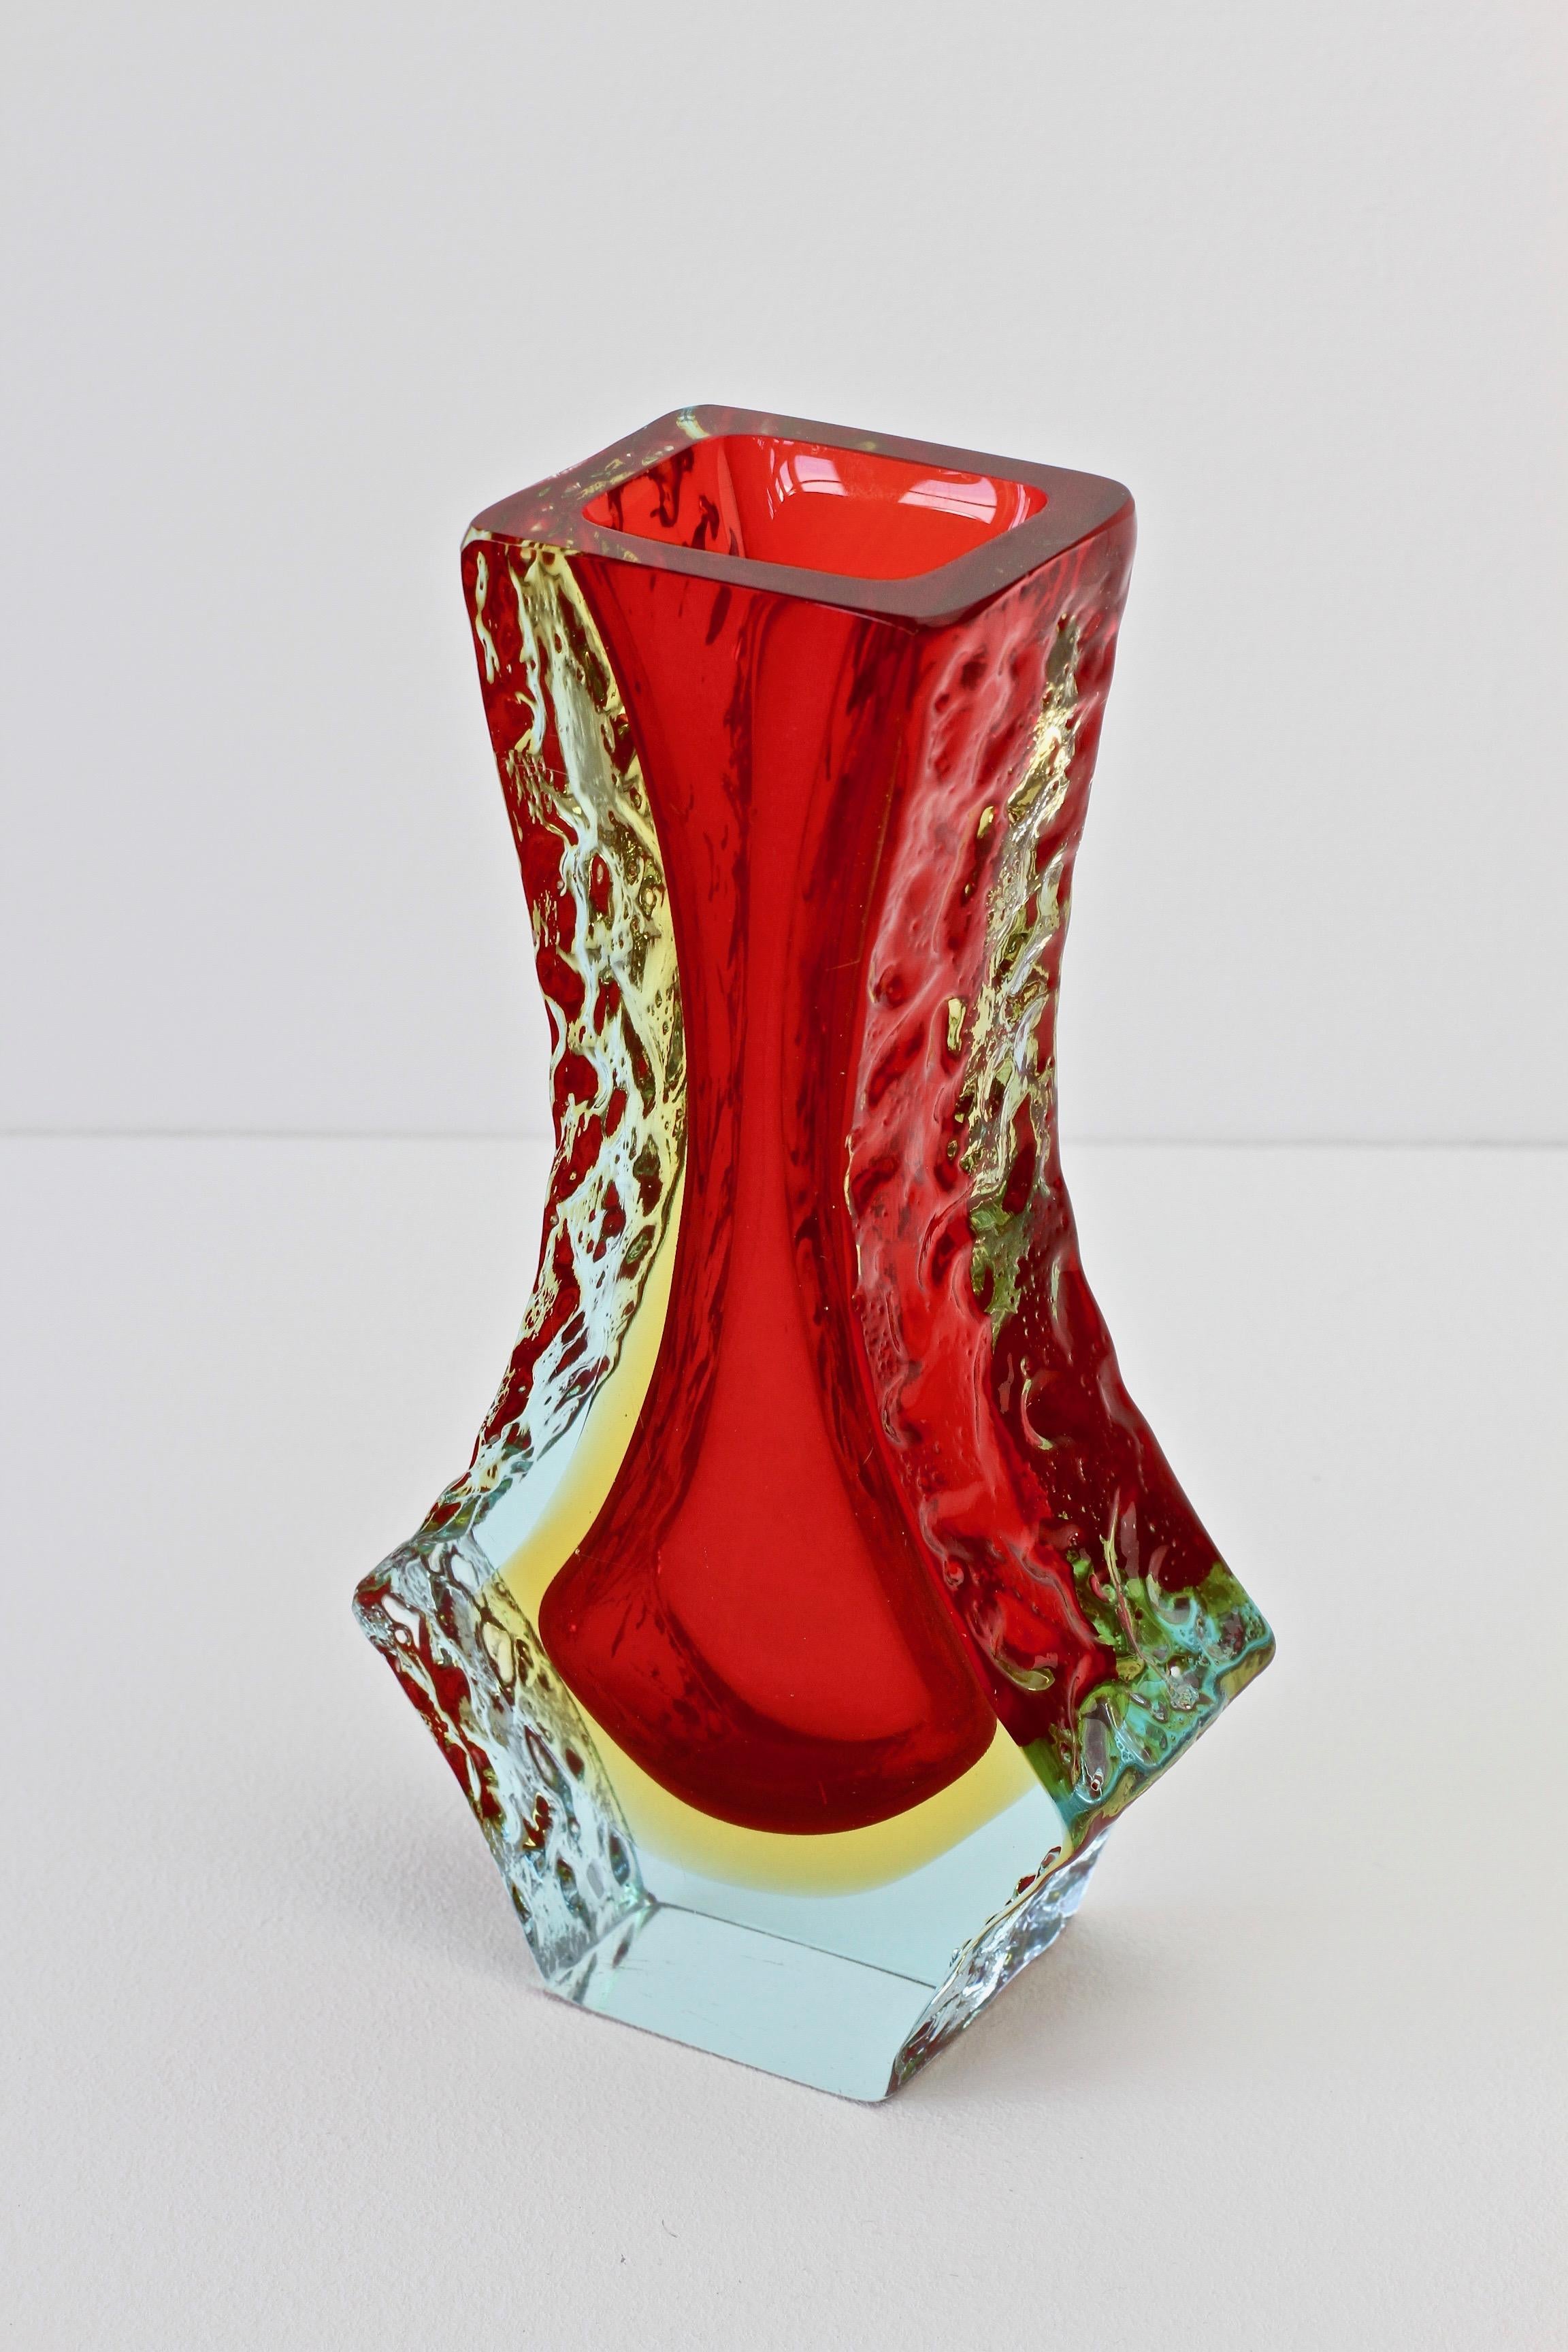 Italian Textured Faceted Murano 'Sommerso' Glass Vase Attributed to Mandruzzato 5